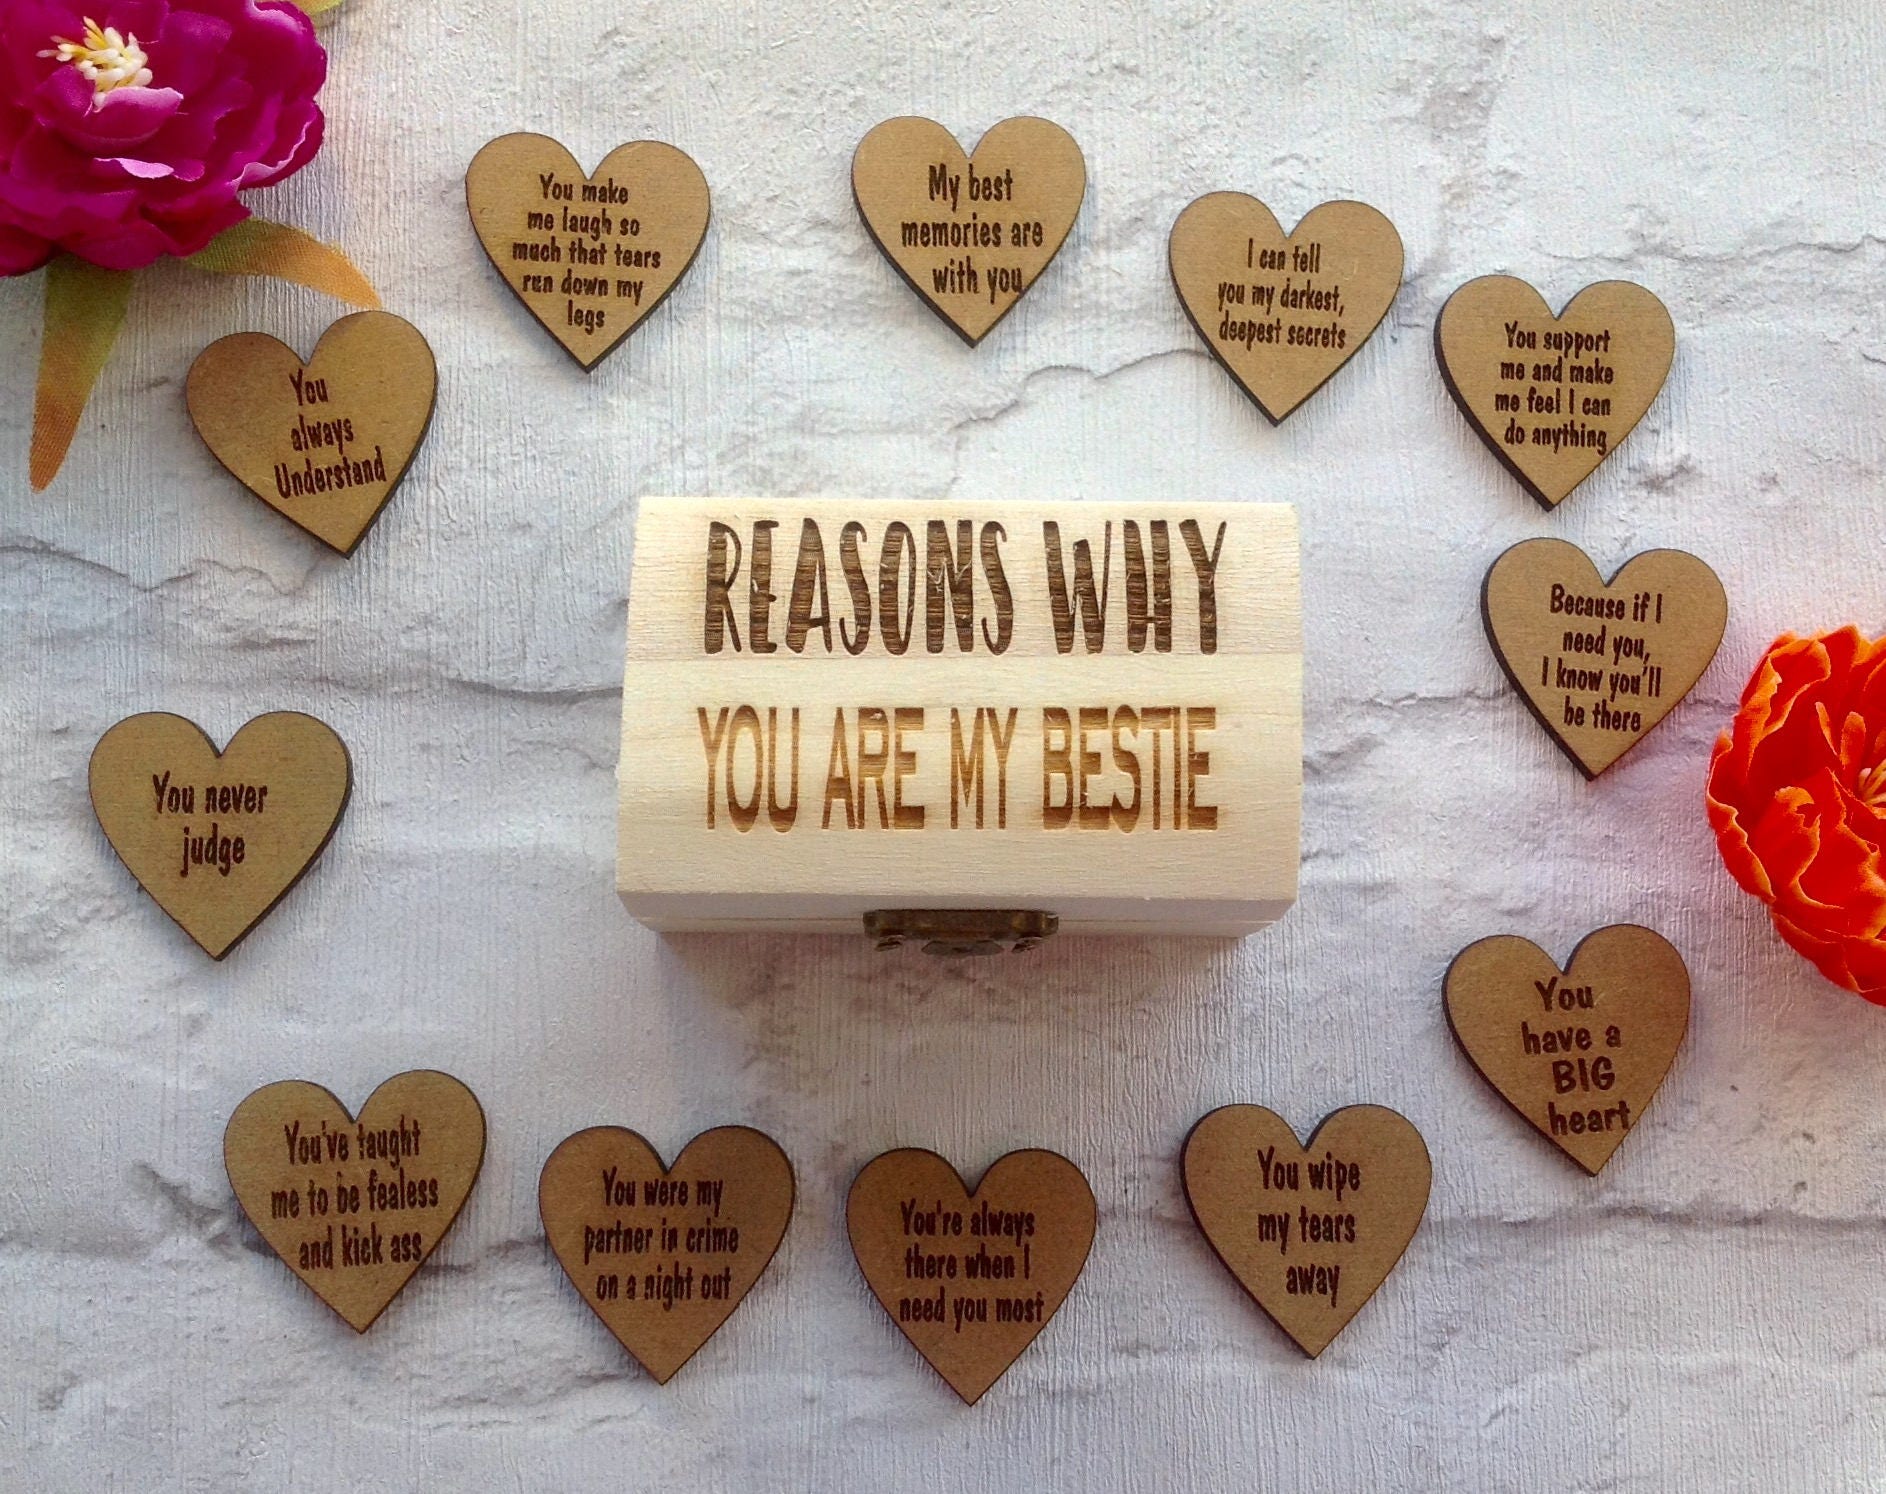 SUNYOVIME Reasons Why You are My Friend Friendship Gift, Unique Friendship  Gift, Friendship Keepsake, 10 Reasons Why You are My Friend, Friendship and